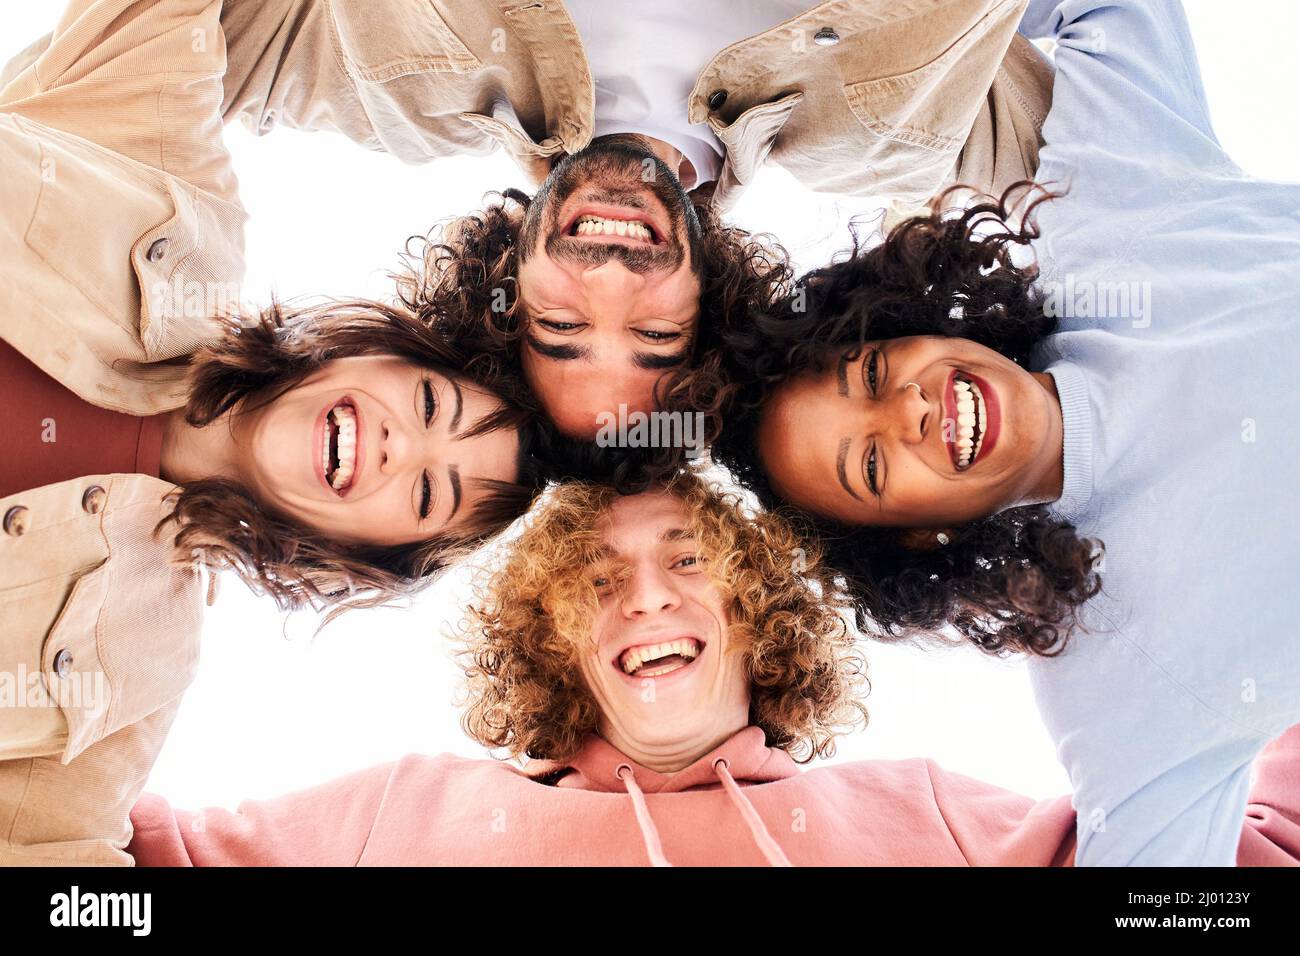 Team of happy young people looking at the camera embracing and having a fun. Smiling cheerful friends. Stock Photo